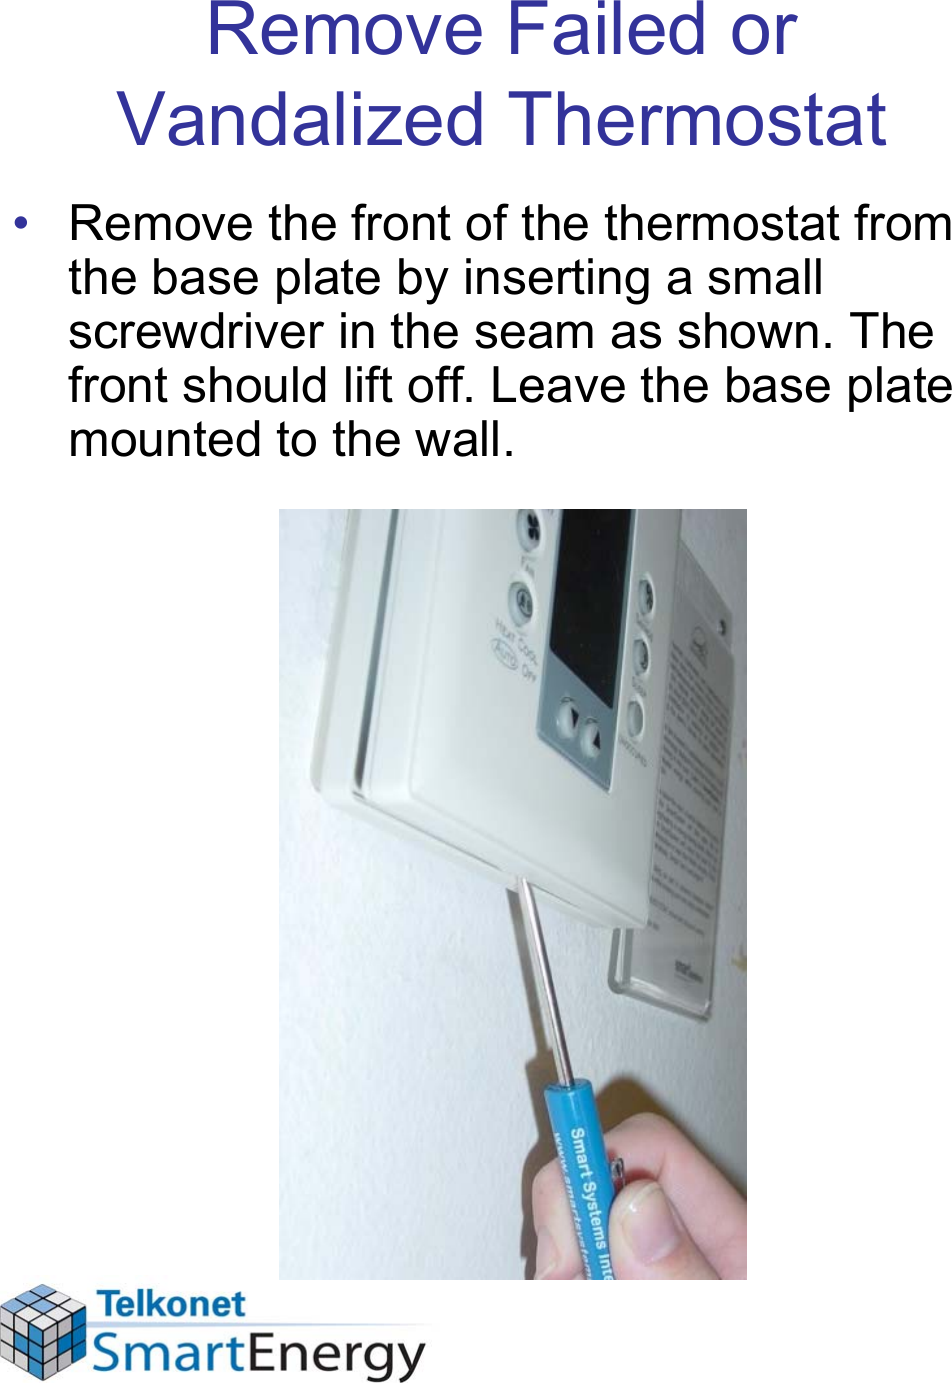 Remove Failed or Vandalized Thermostat• Remove the front of the thermostat from the base plate by inserting a small screwdriver in the seam as shown. The front should lift off. Leave the base plate mounted to the wall.